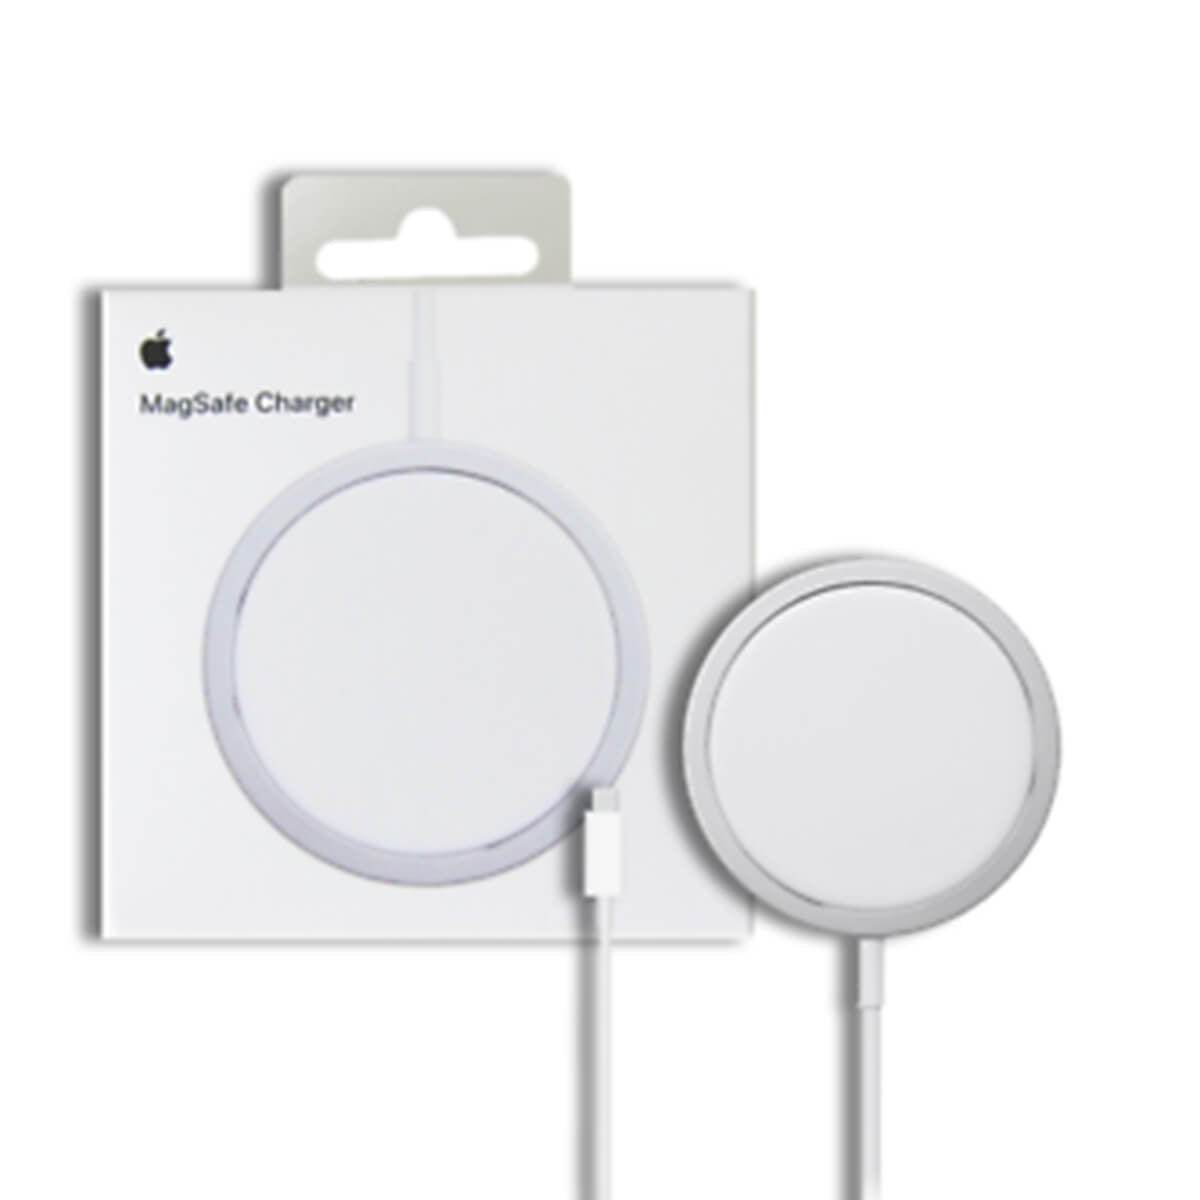 Magsafe Charger Apple Charger